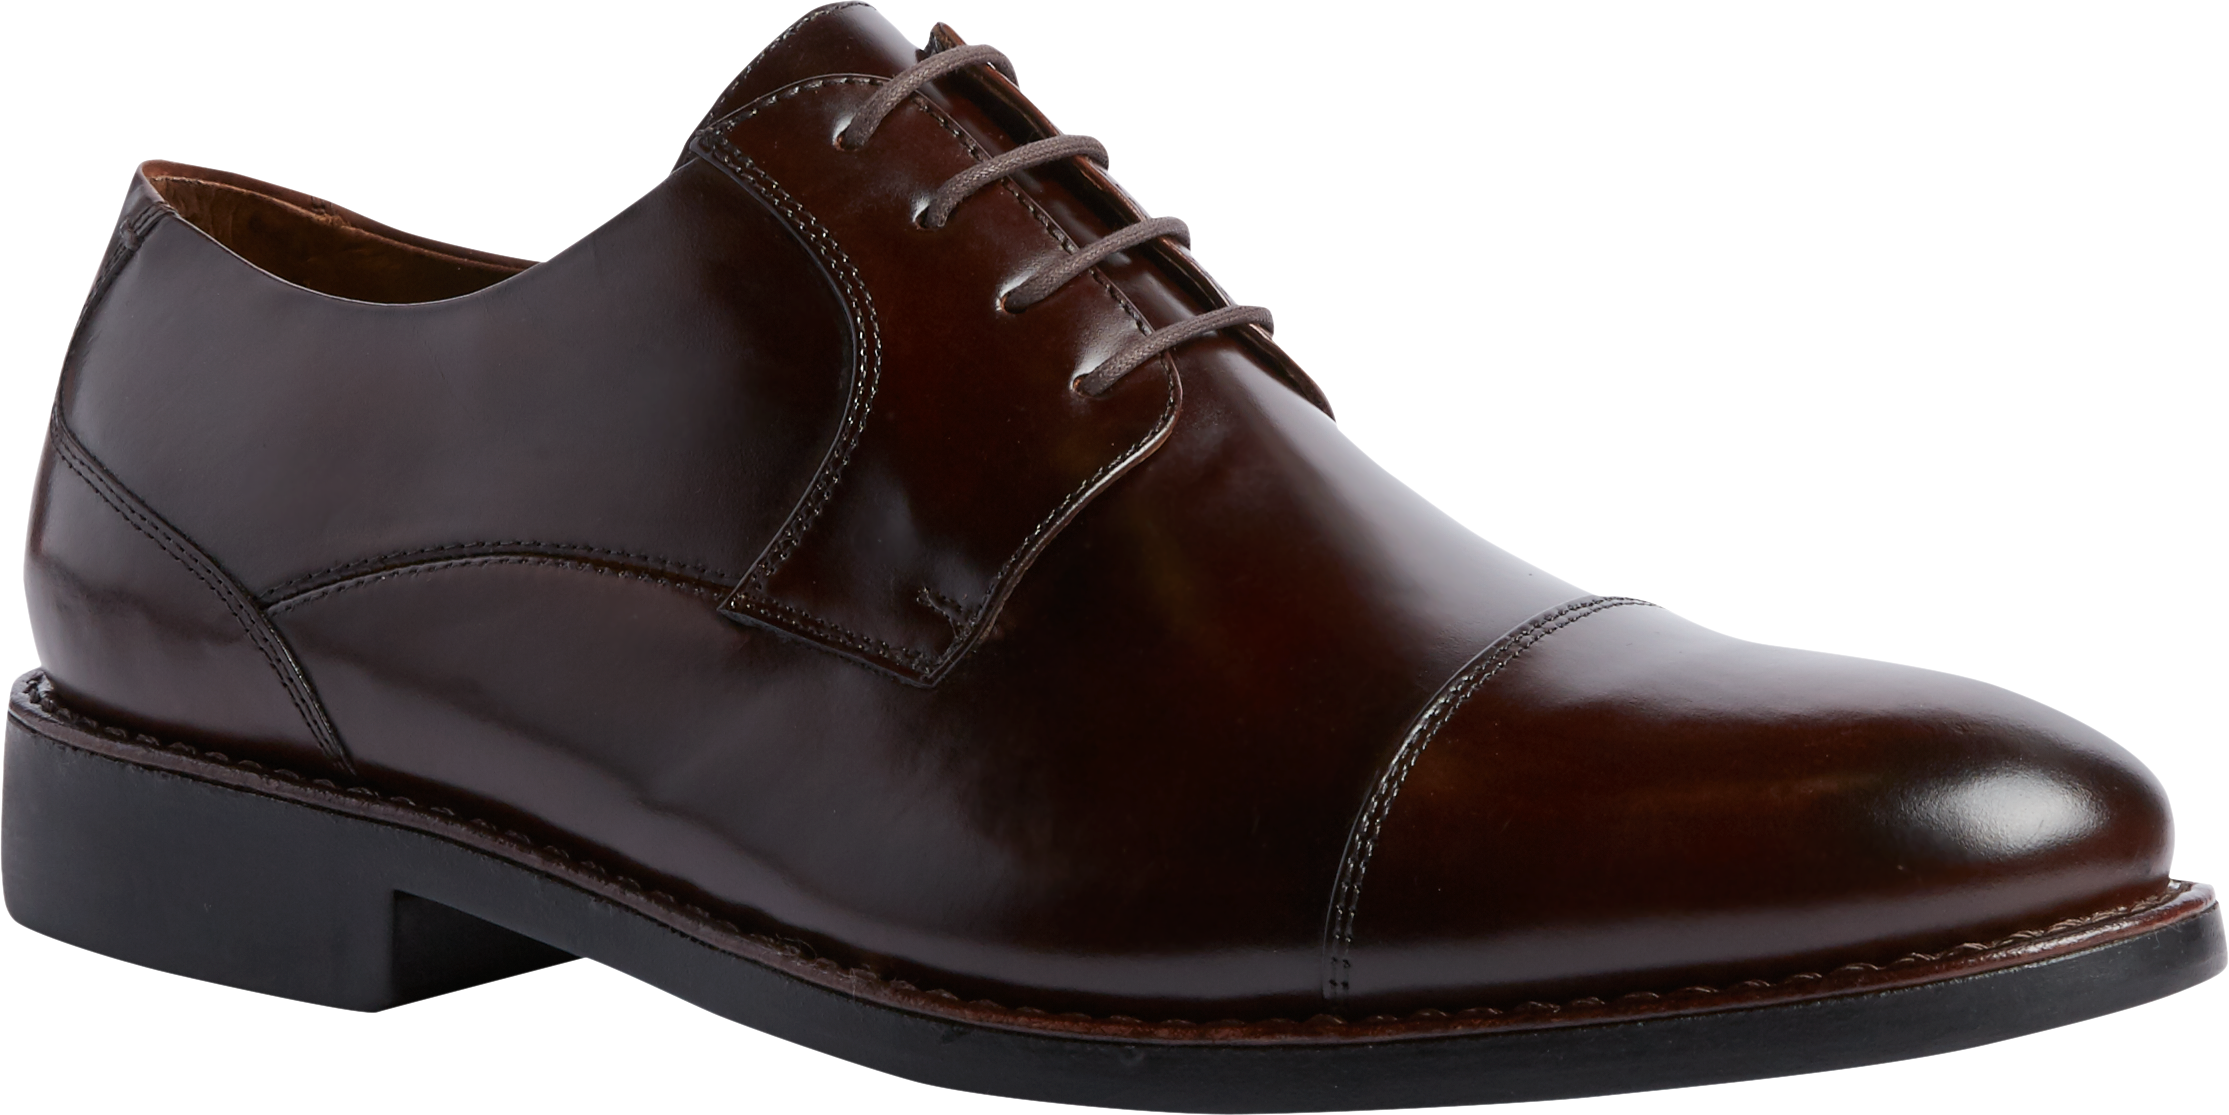 Joseph Abboud David Straight Tip Oxfords CLEARANCE